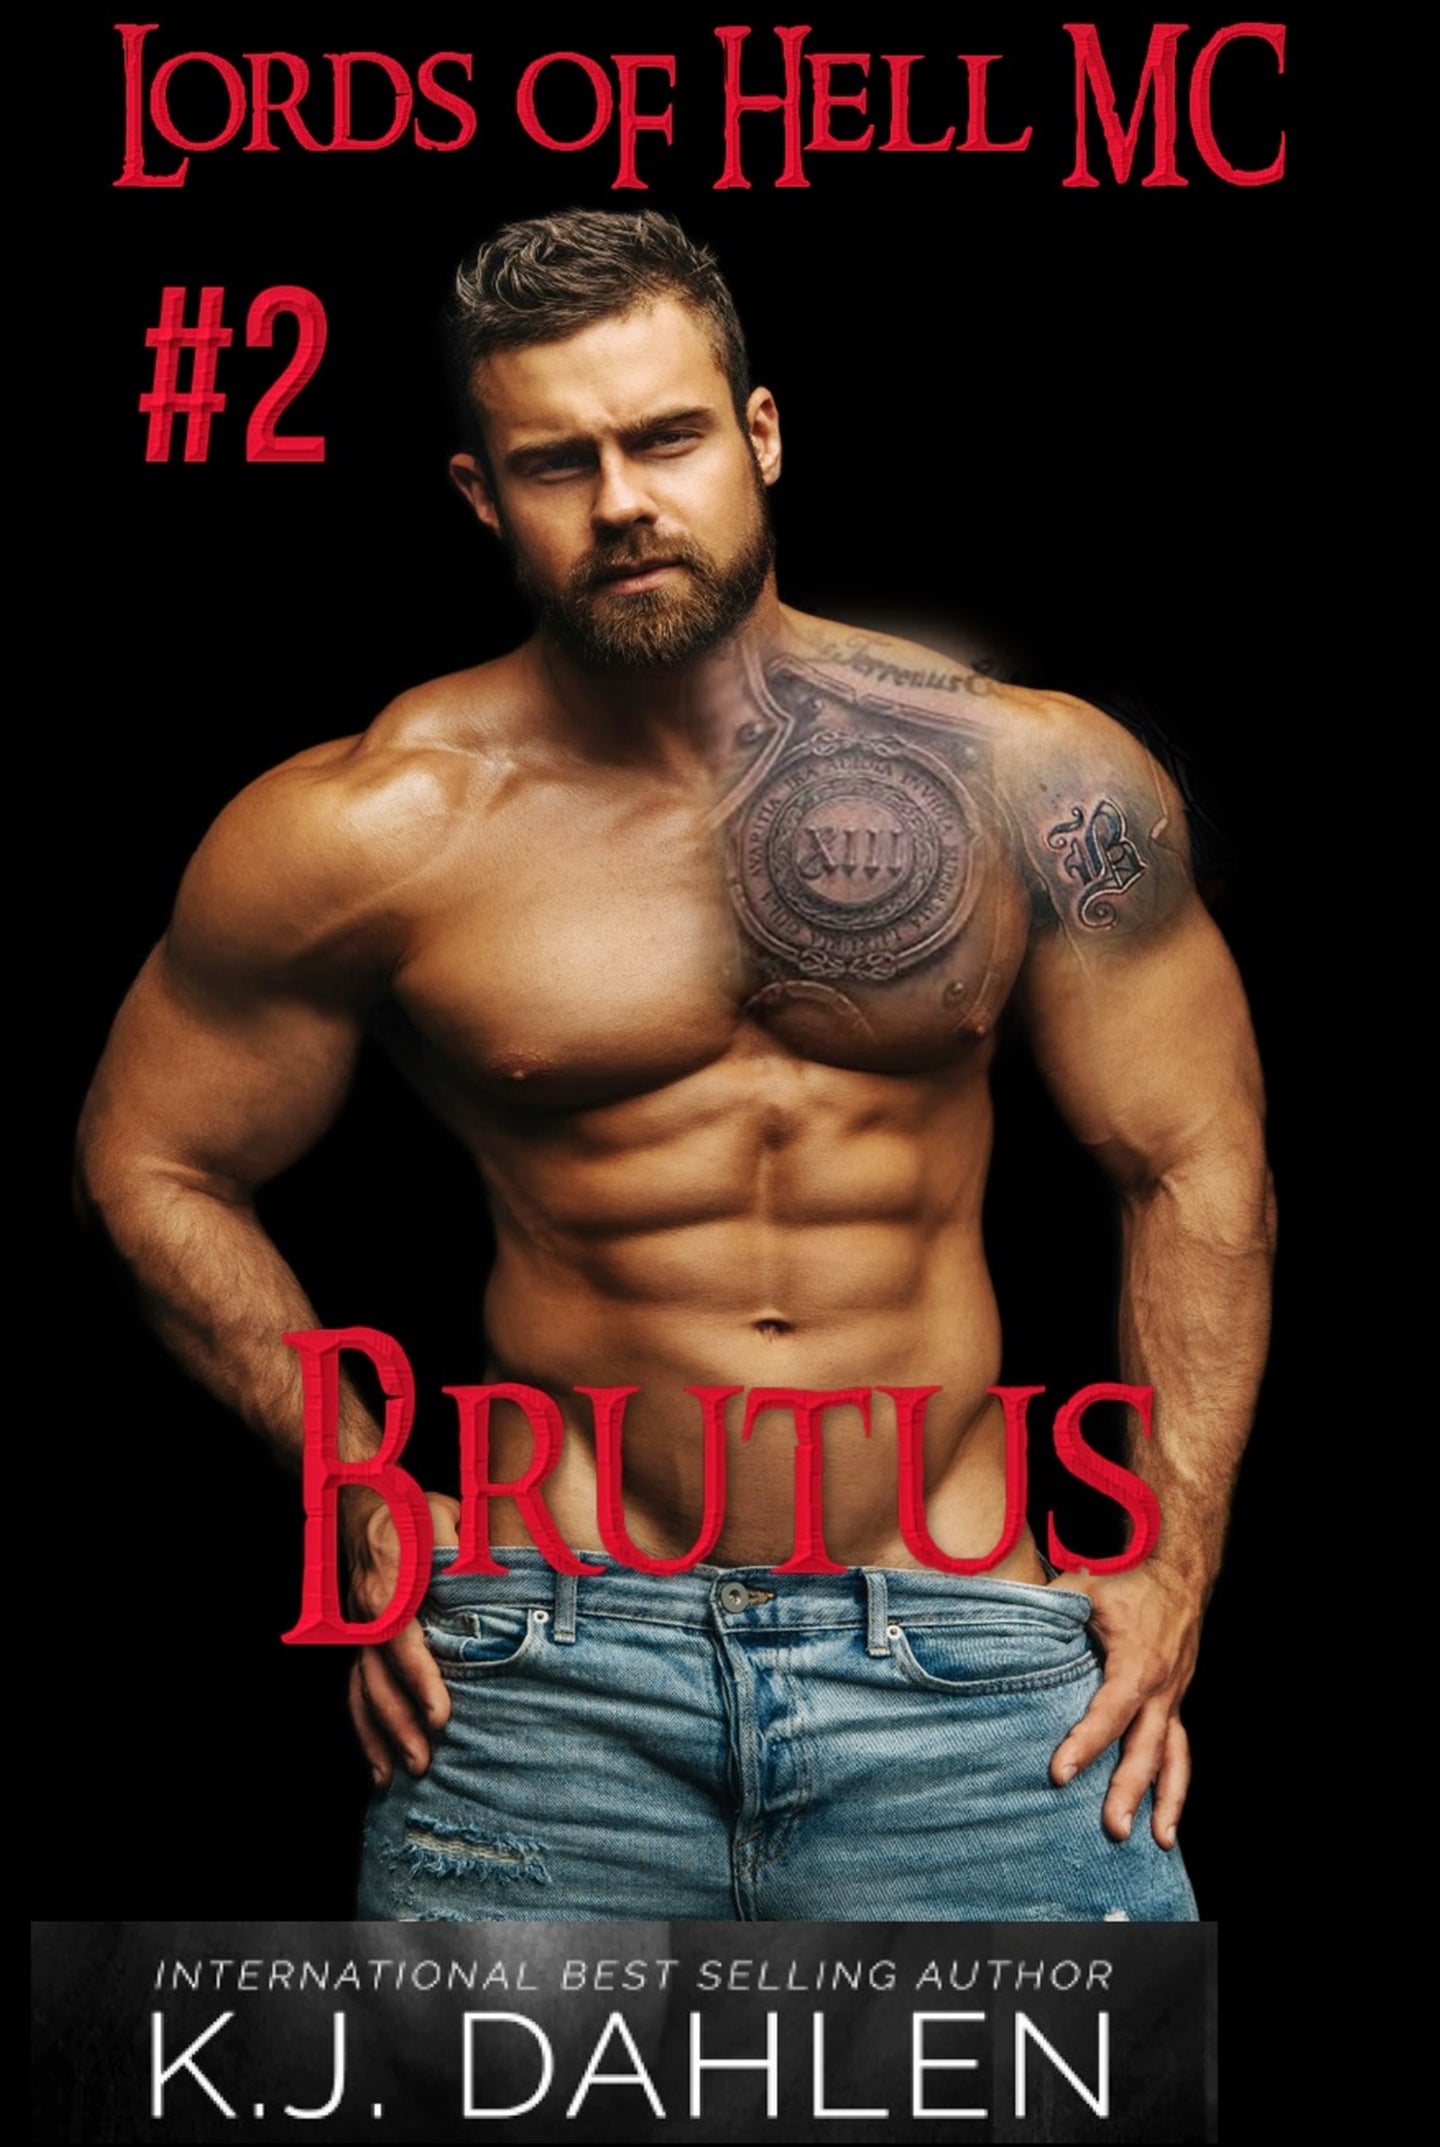 Brutus-Lords Of Hell MC #2-Single